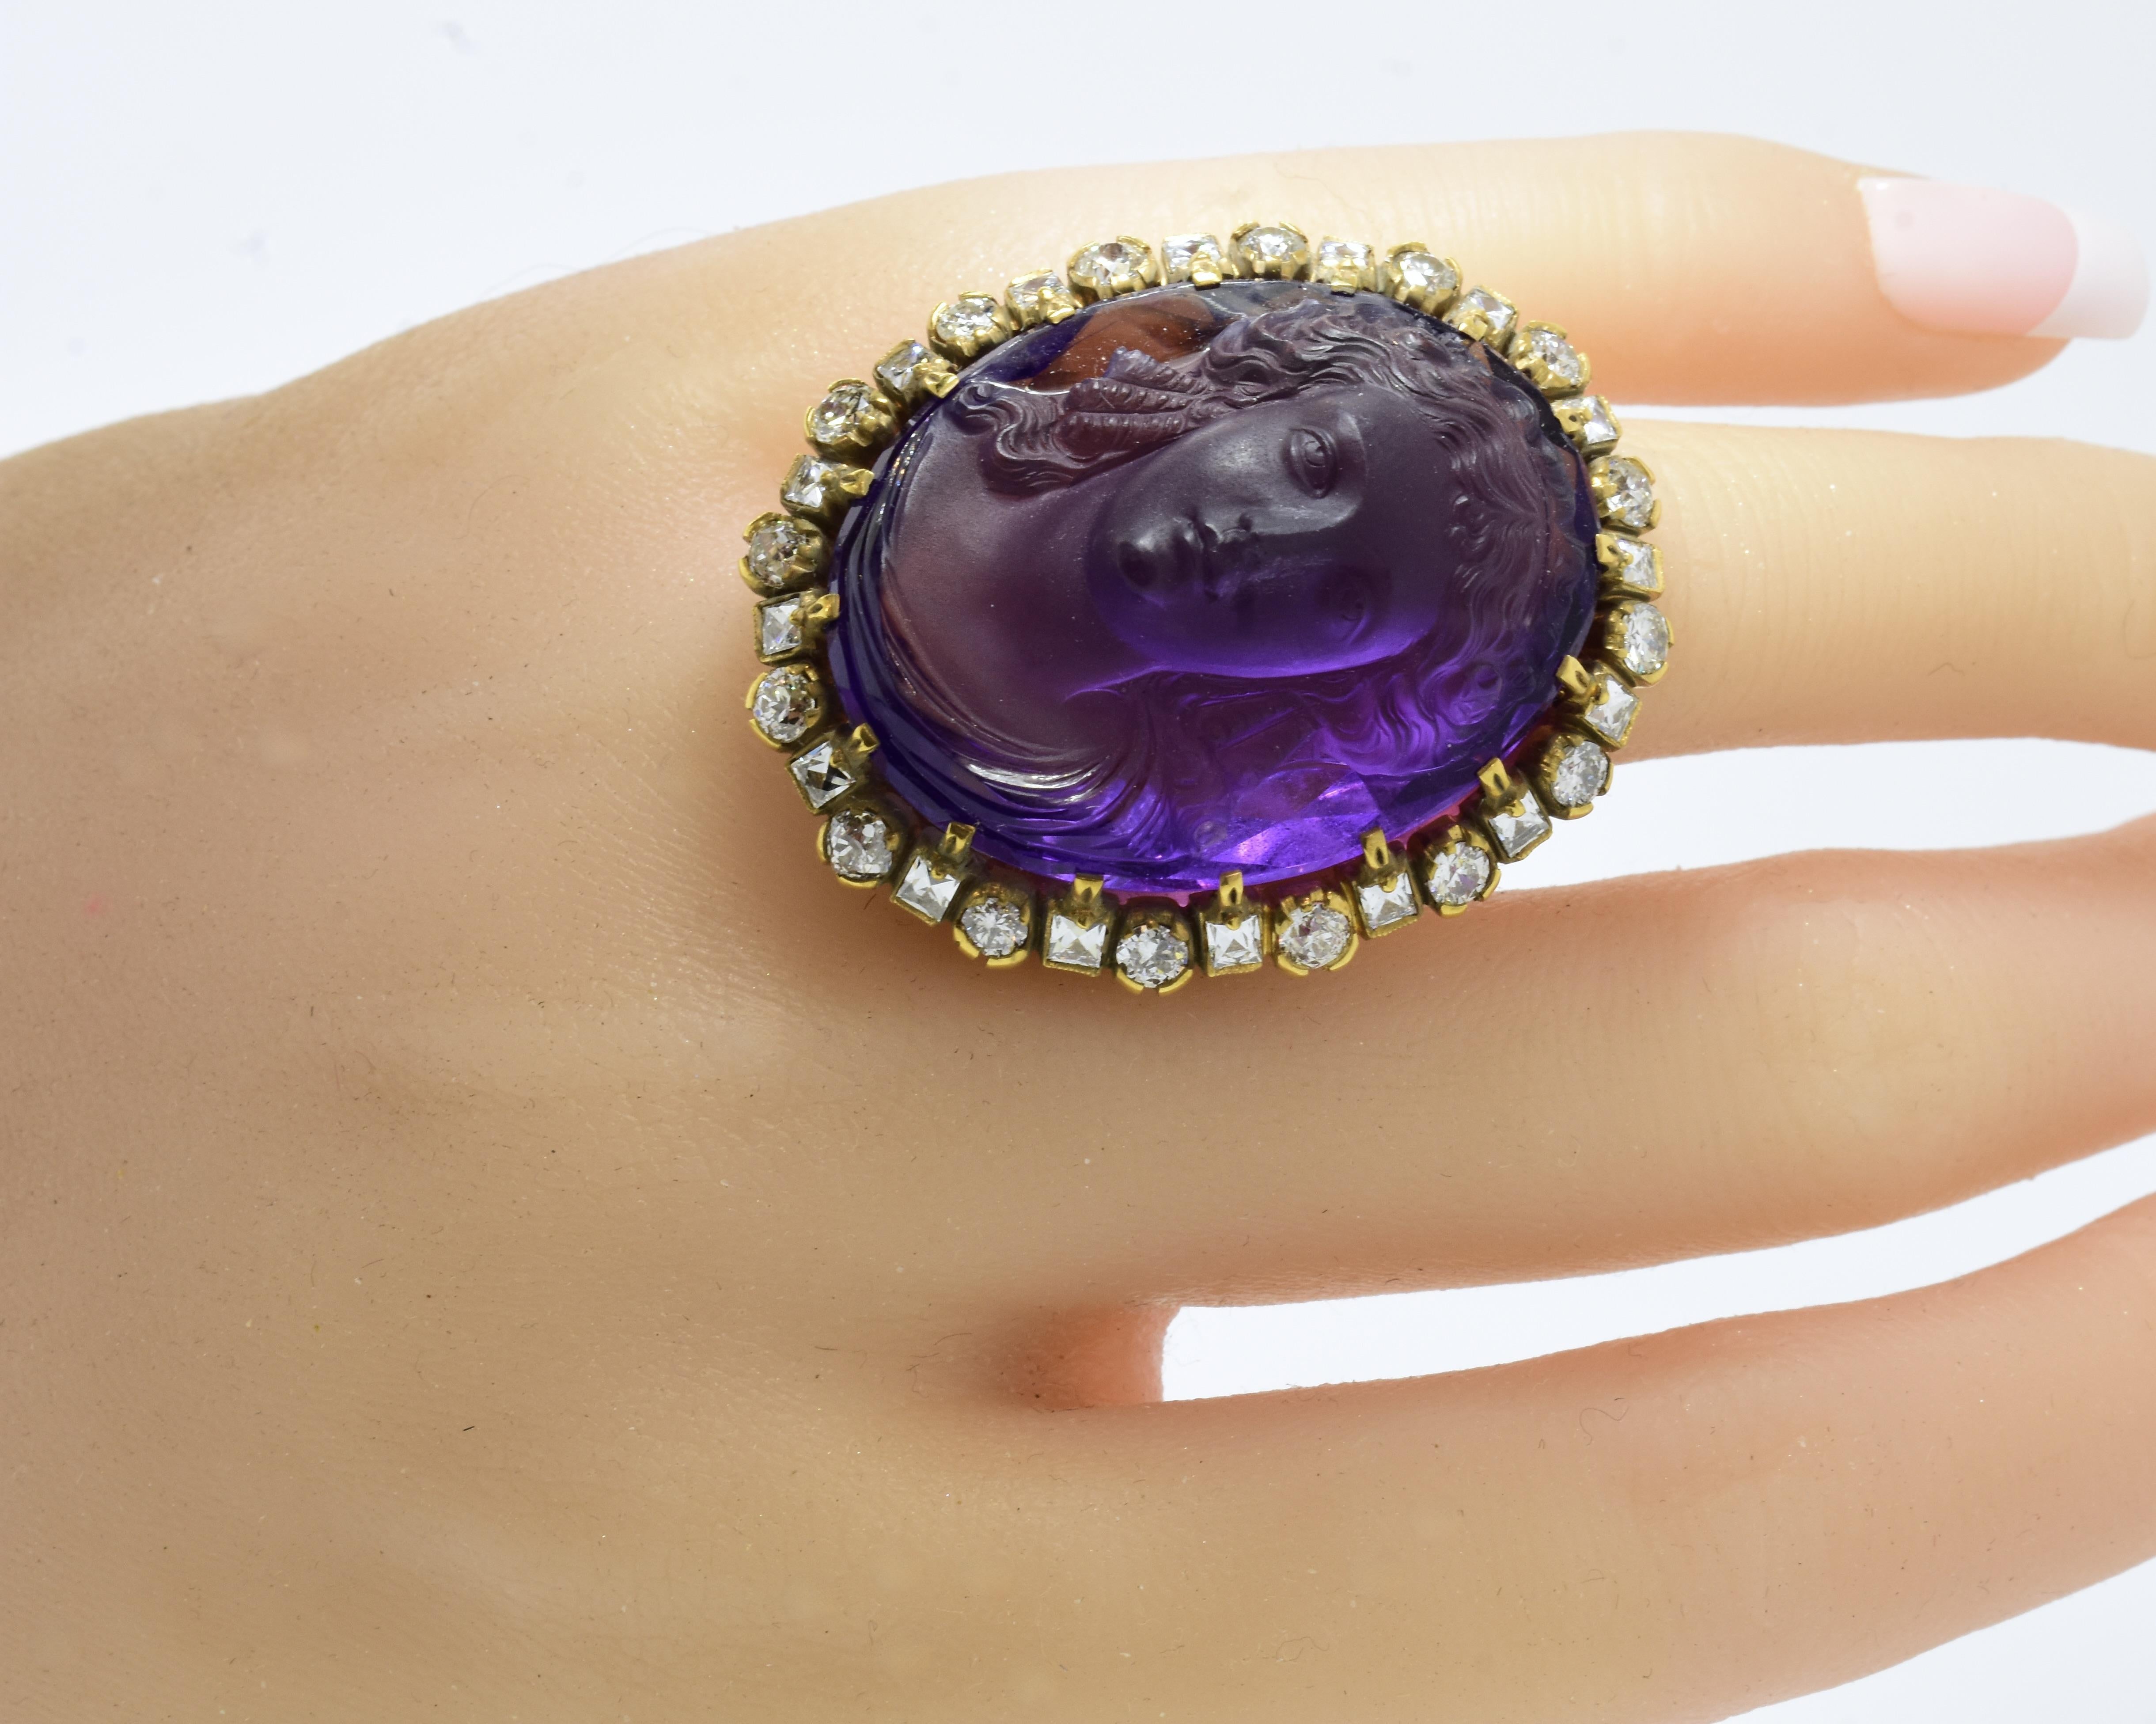 Antique cameo and diamond ring, circa 1880.  Large, bold and unusual,  the natural amethyst, held by 16 prongs, weighs approximately 65 cts., and displays a fine bright purple color.  The carving of a classic early Greek or Roman woman with